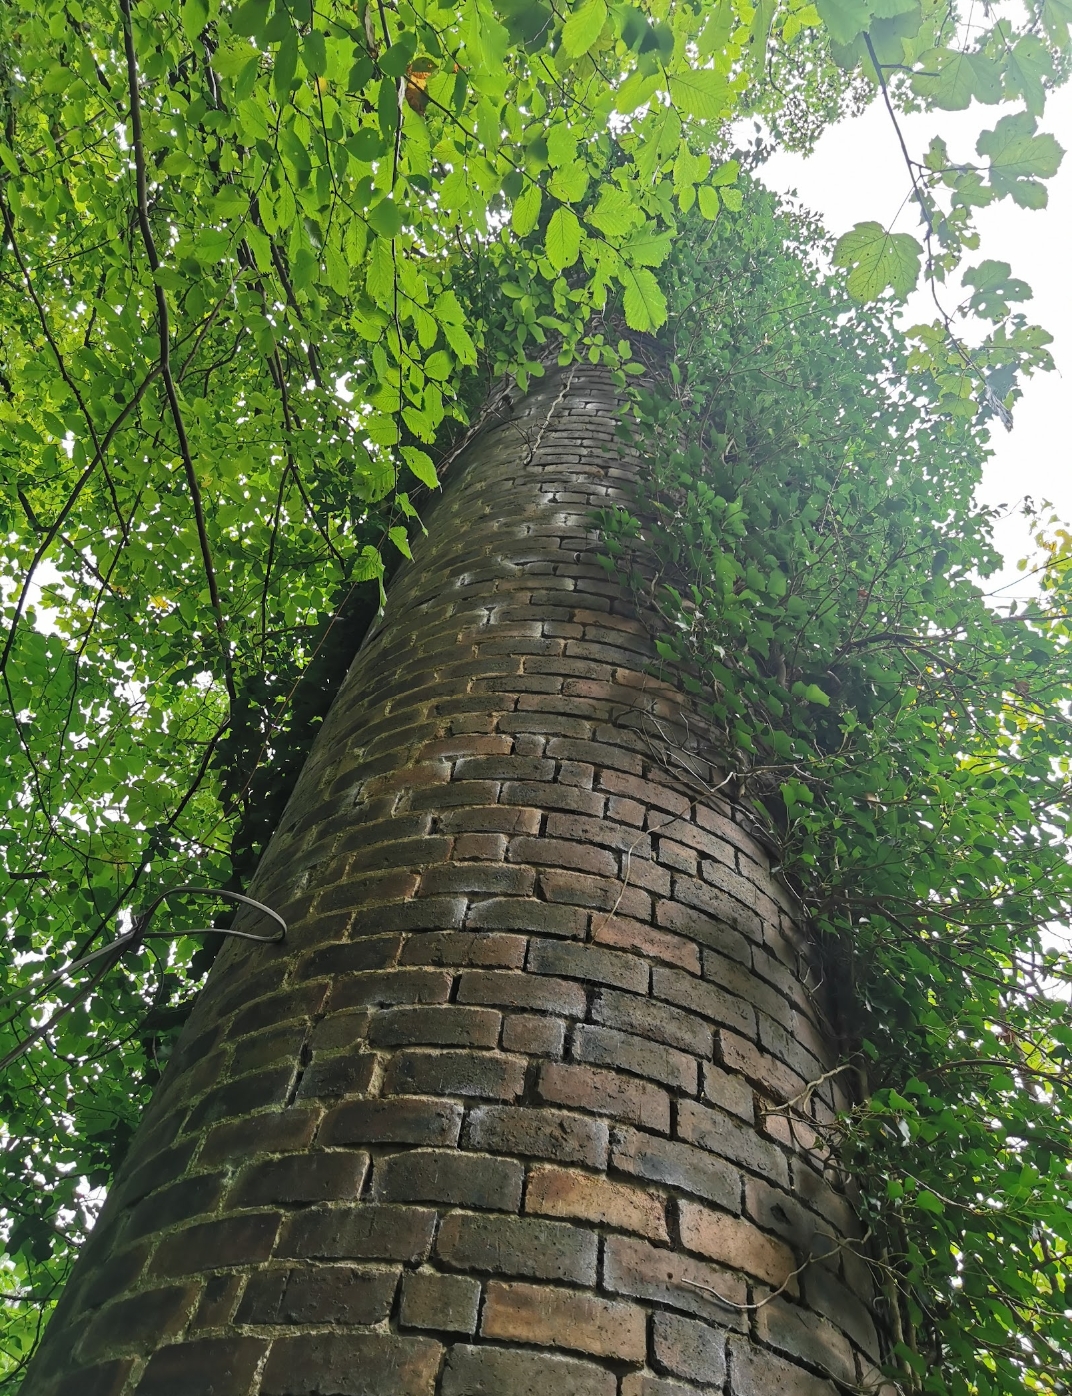 A tall chimney is covered by ivy and surrounded by trees